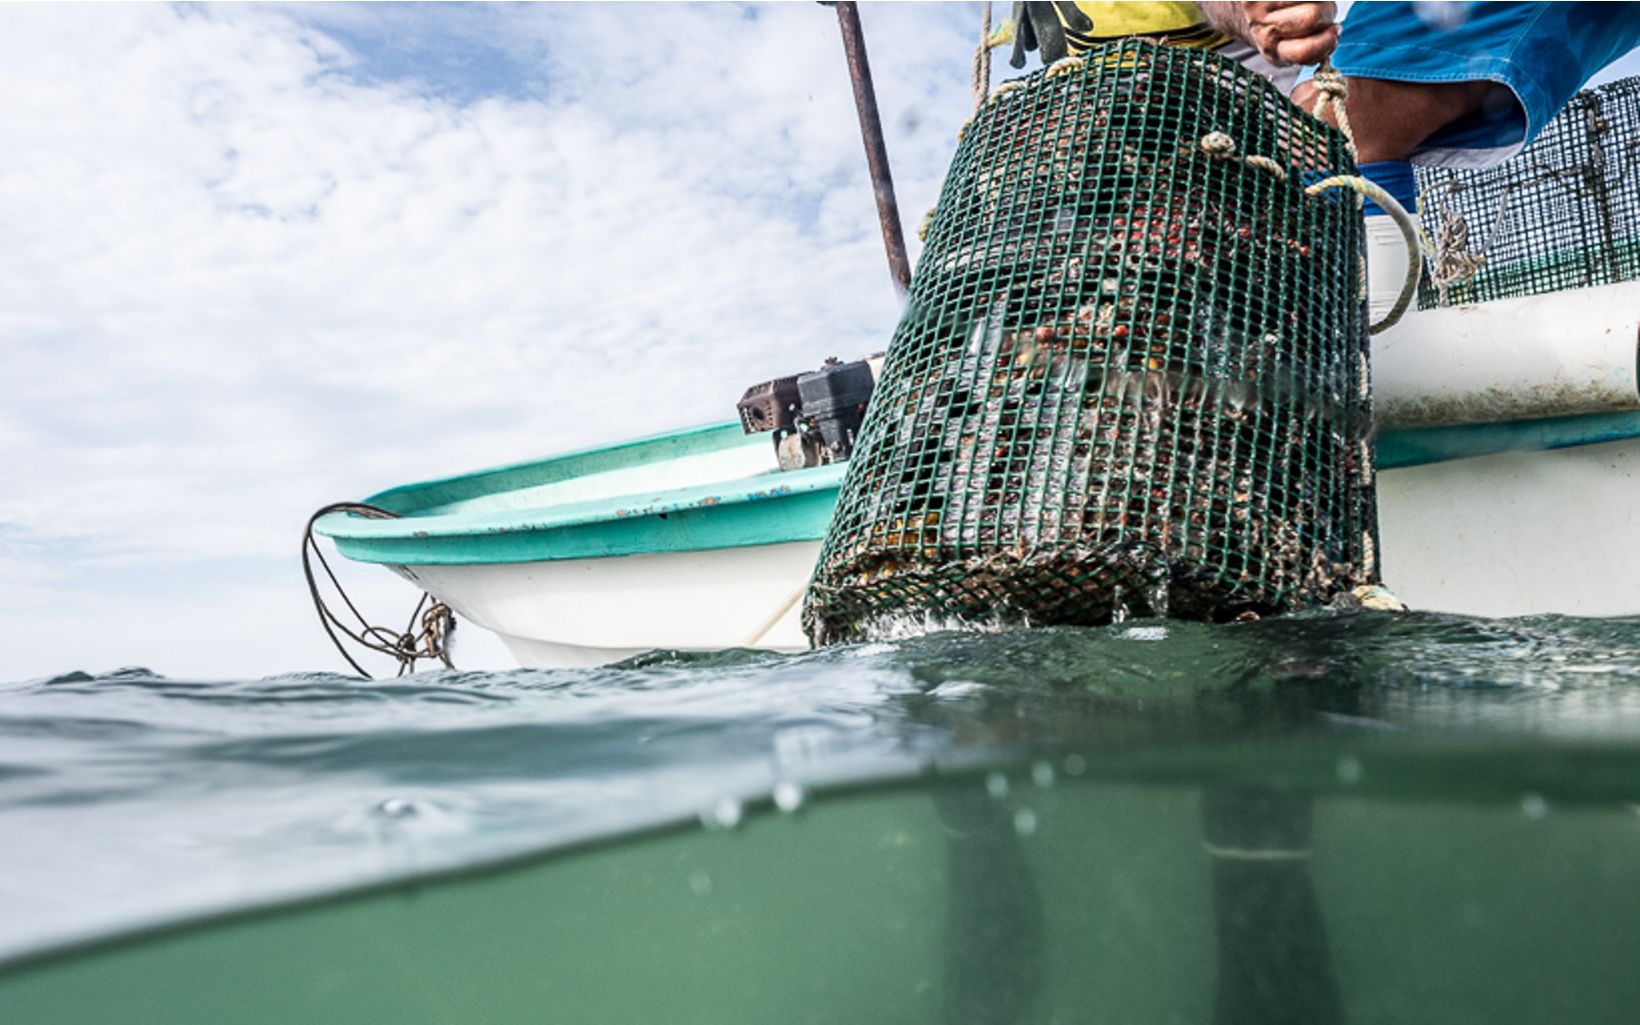 Scallop harvest  Poseidon transforms photos into datasets that help fishing communities make real-time decisions about how to keep their fisheries healthy. © David Hills